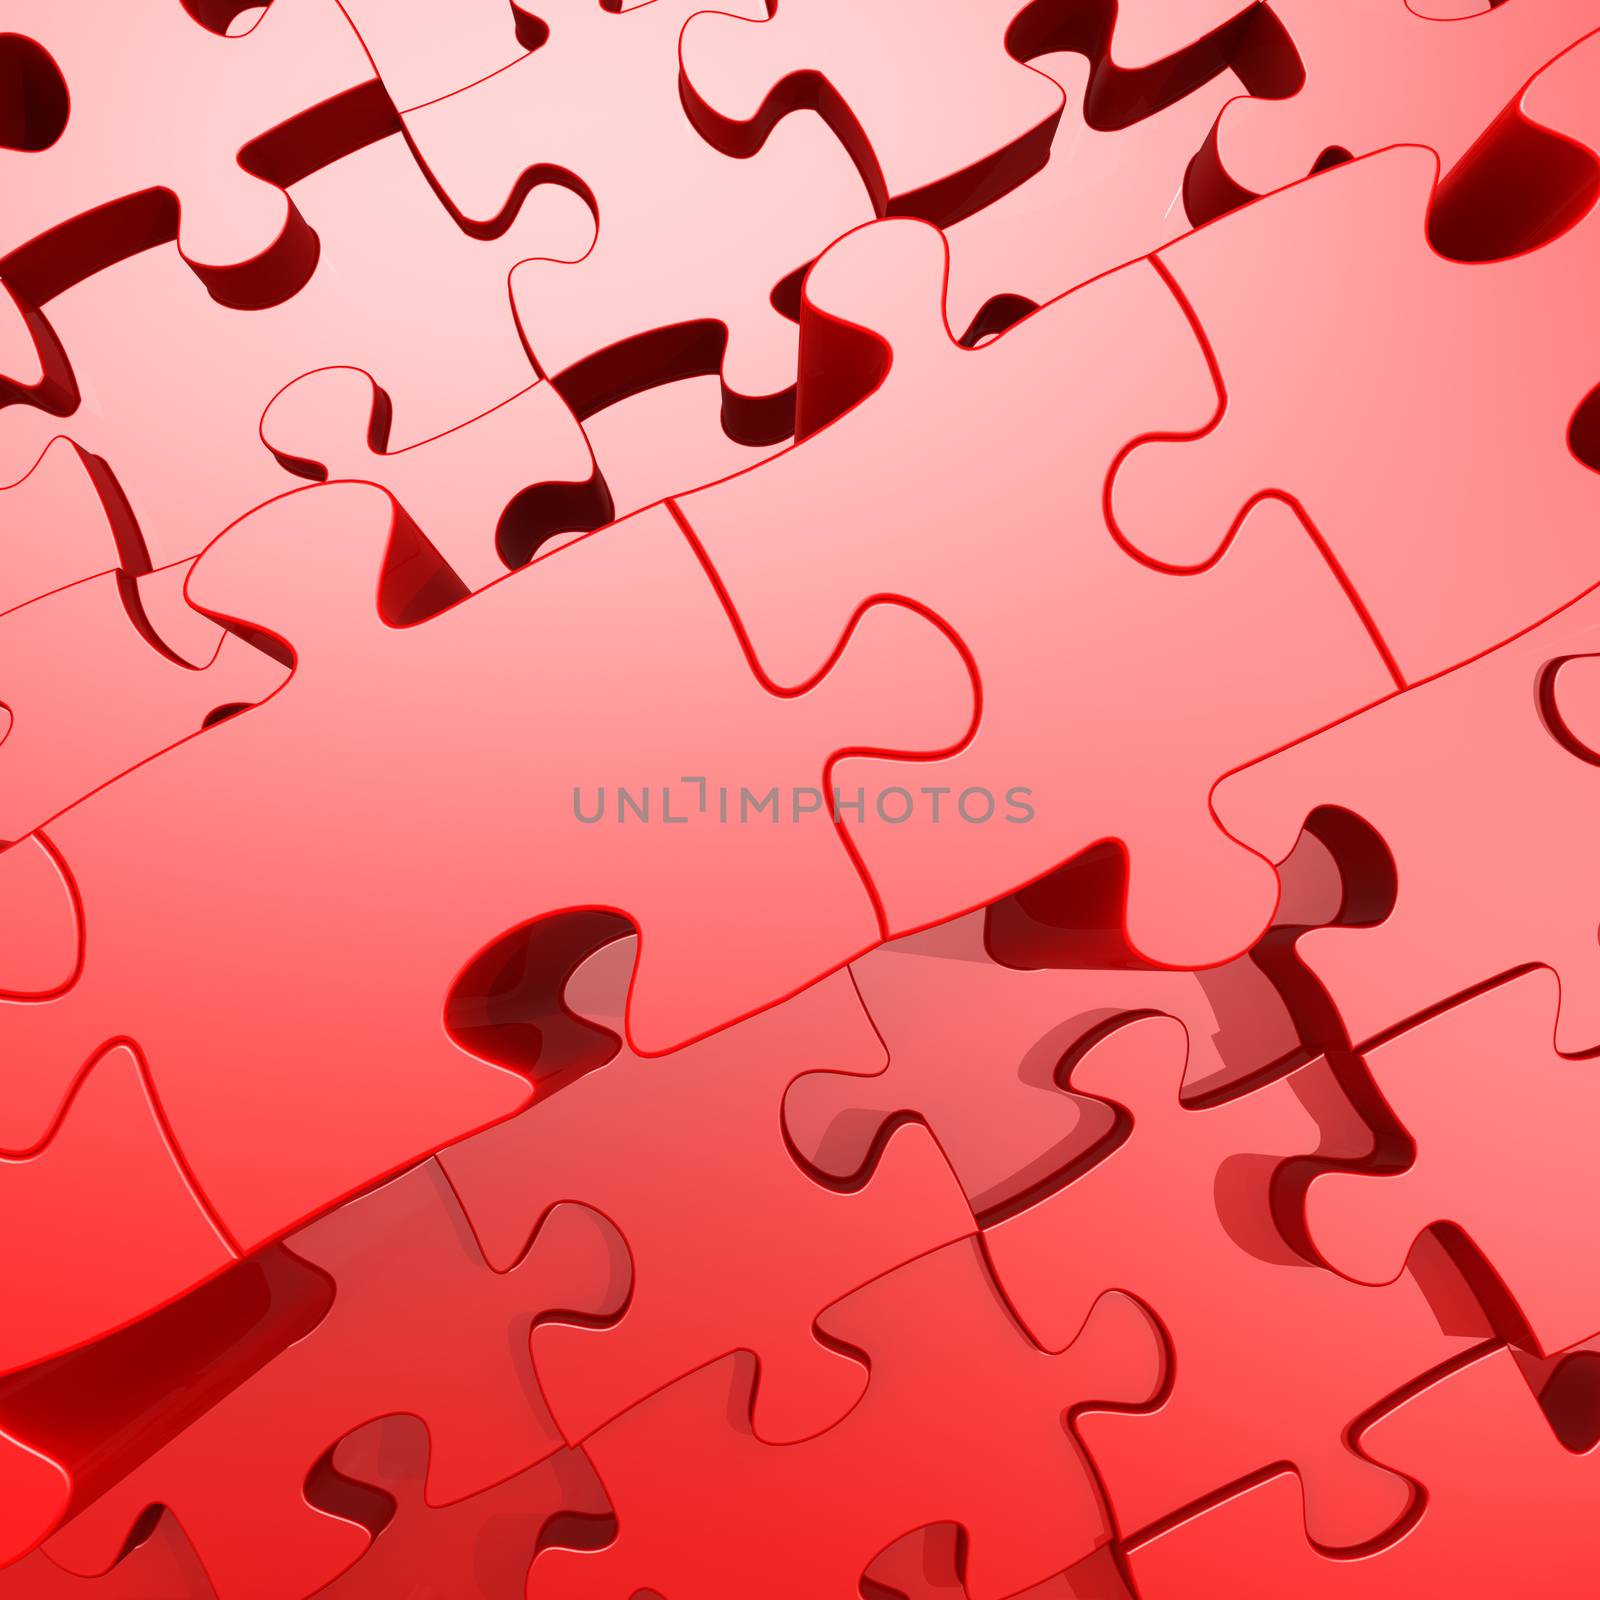 Red jigsaw puzzle with 3D effect image with hi-res rendered artwork that could be used for any graphic design.